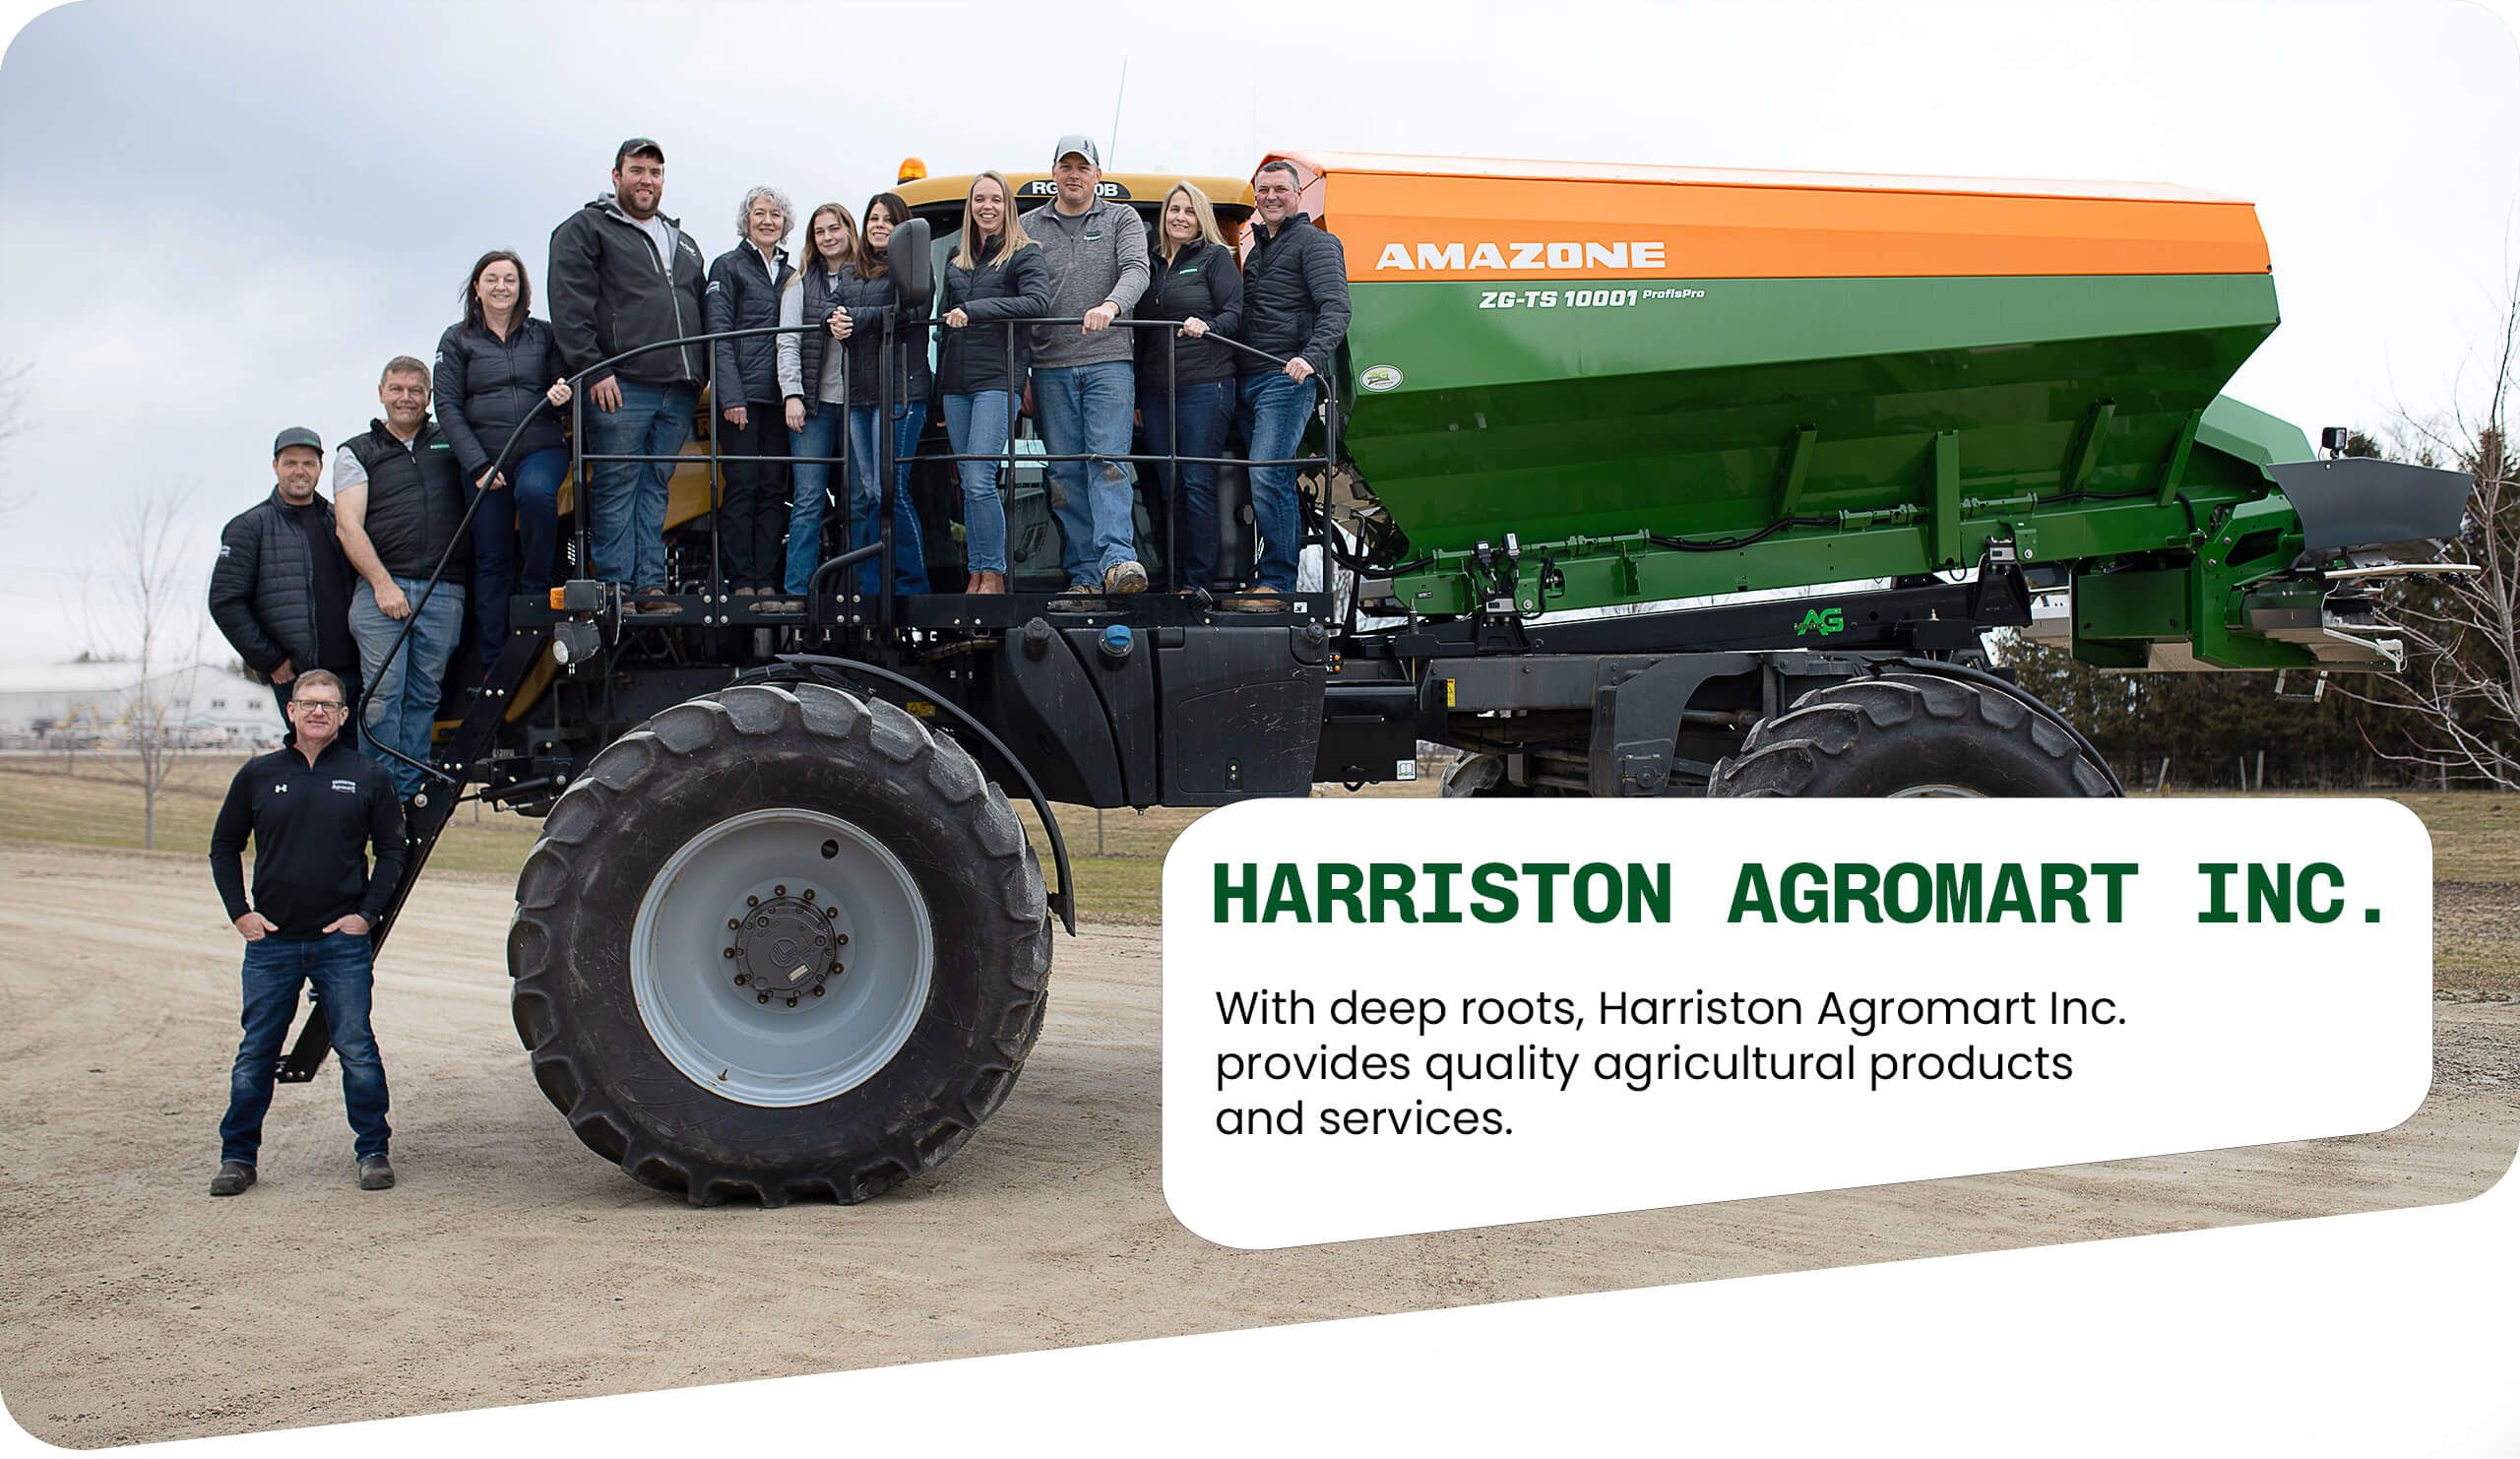 Harriston Agromart team on Amazone agriculture machine and text overlay 'Harriston Agromart Inc. with deep roots, Harriston Agromart Inc. provides quality agricultural products and services'